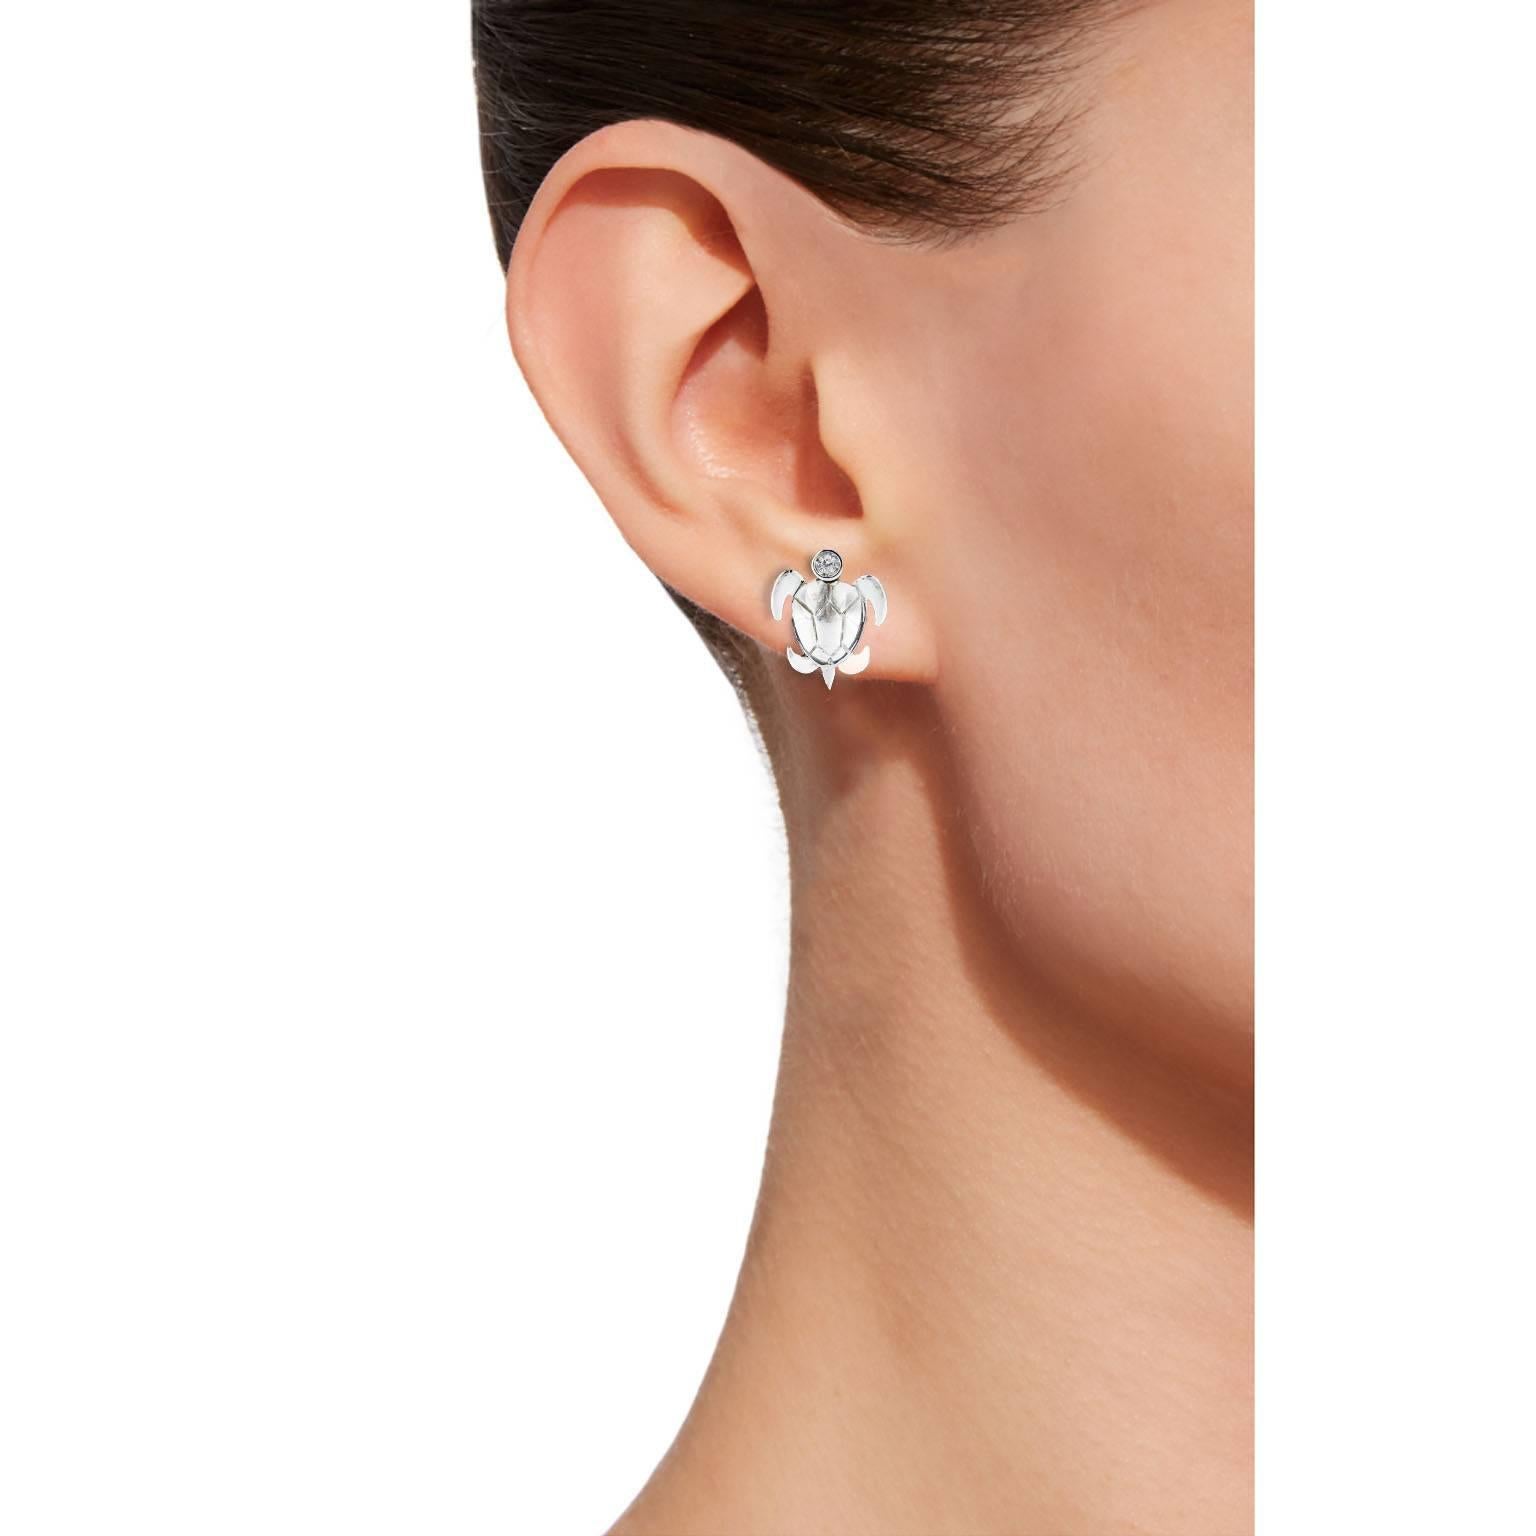 Jona design collection, hand crafted in Italy, 18 karat white gold diamond sea turtle stud earrings with white diamond head (carats 0.10 total weight).

All of our jewelry is new and has never been previously owned or worn.

 
